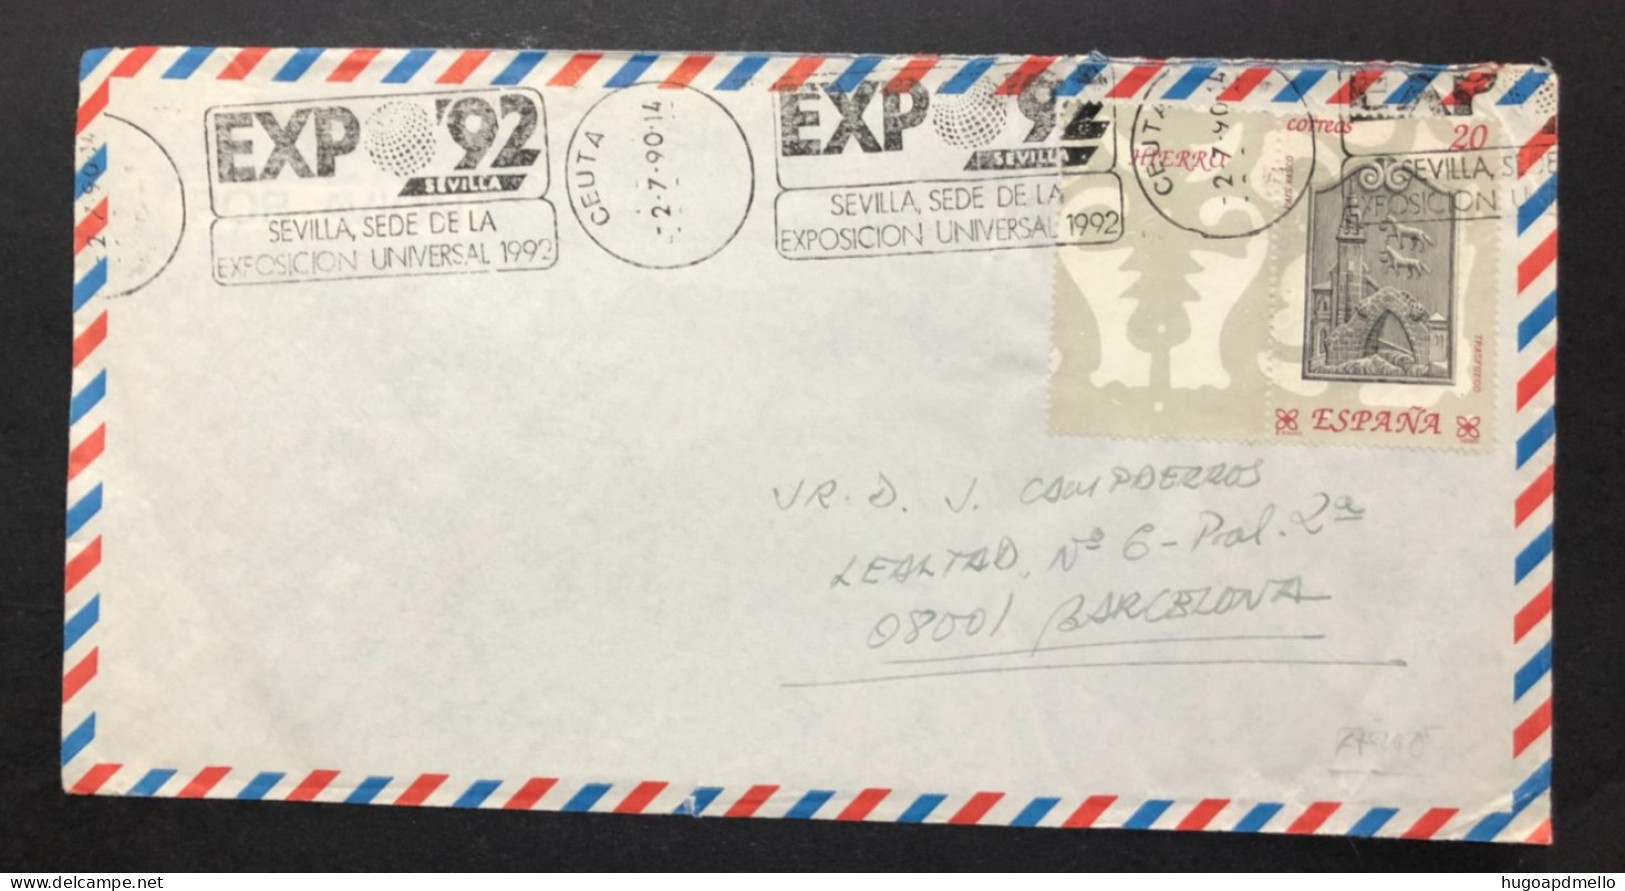 SPAIN, Cover With Special Cancellation « EXPO '92 », « CEUTA Postmark », 1990 - 1992 – Séville (Espagne)